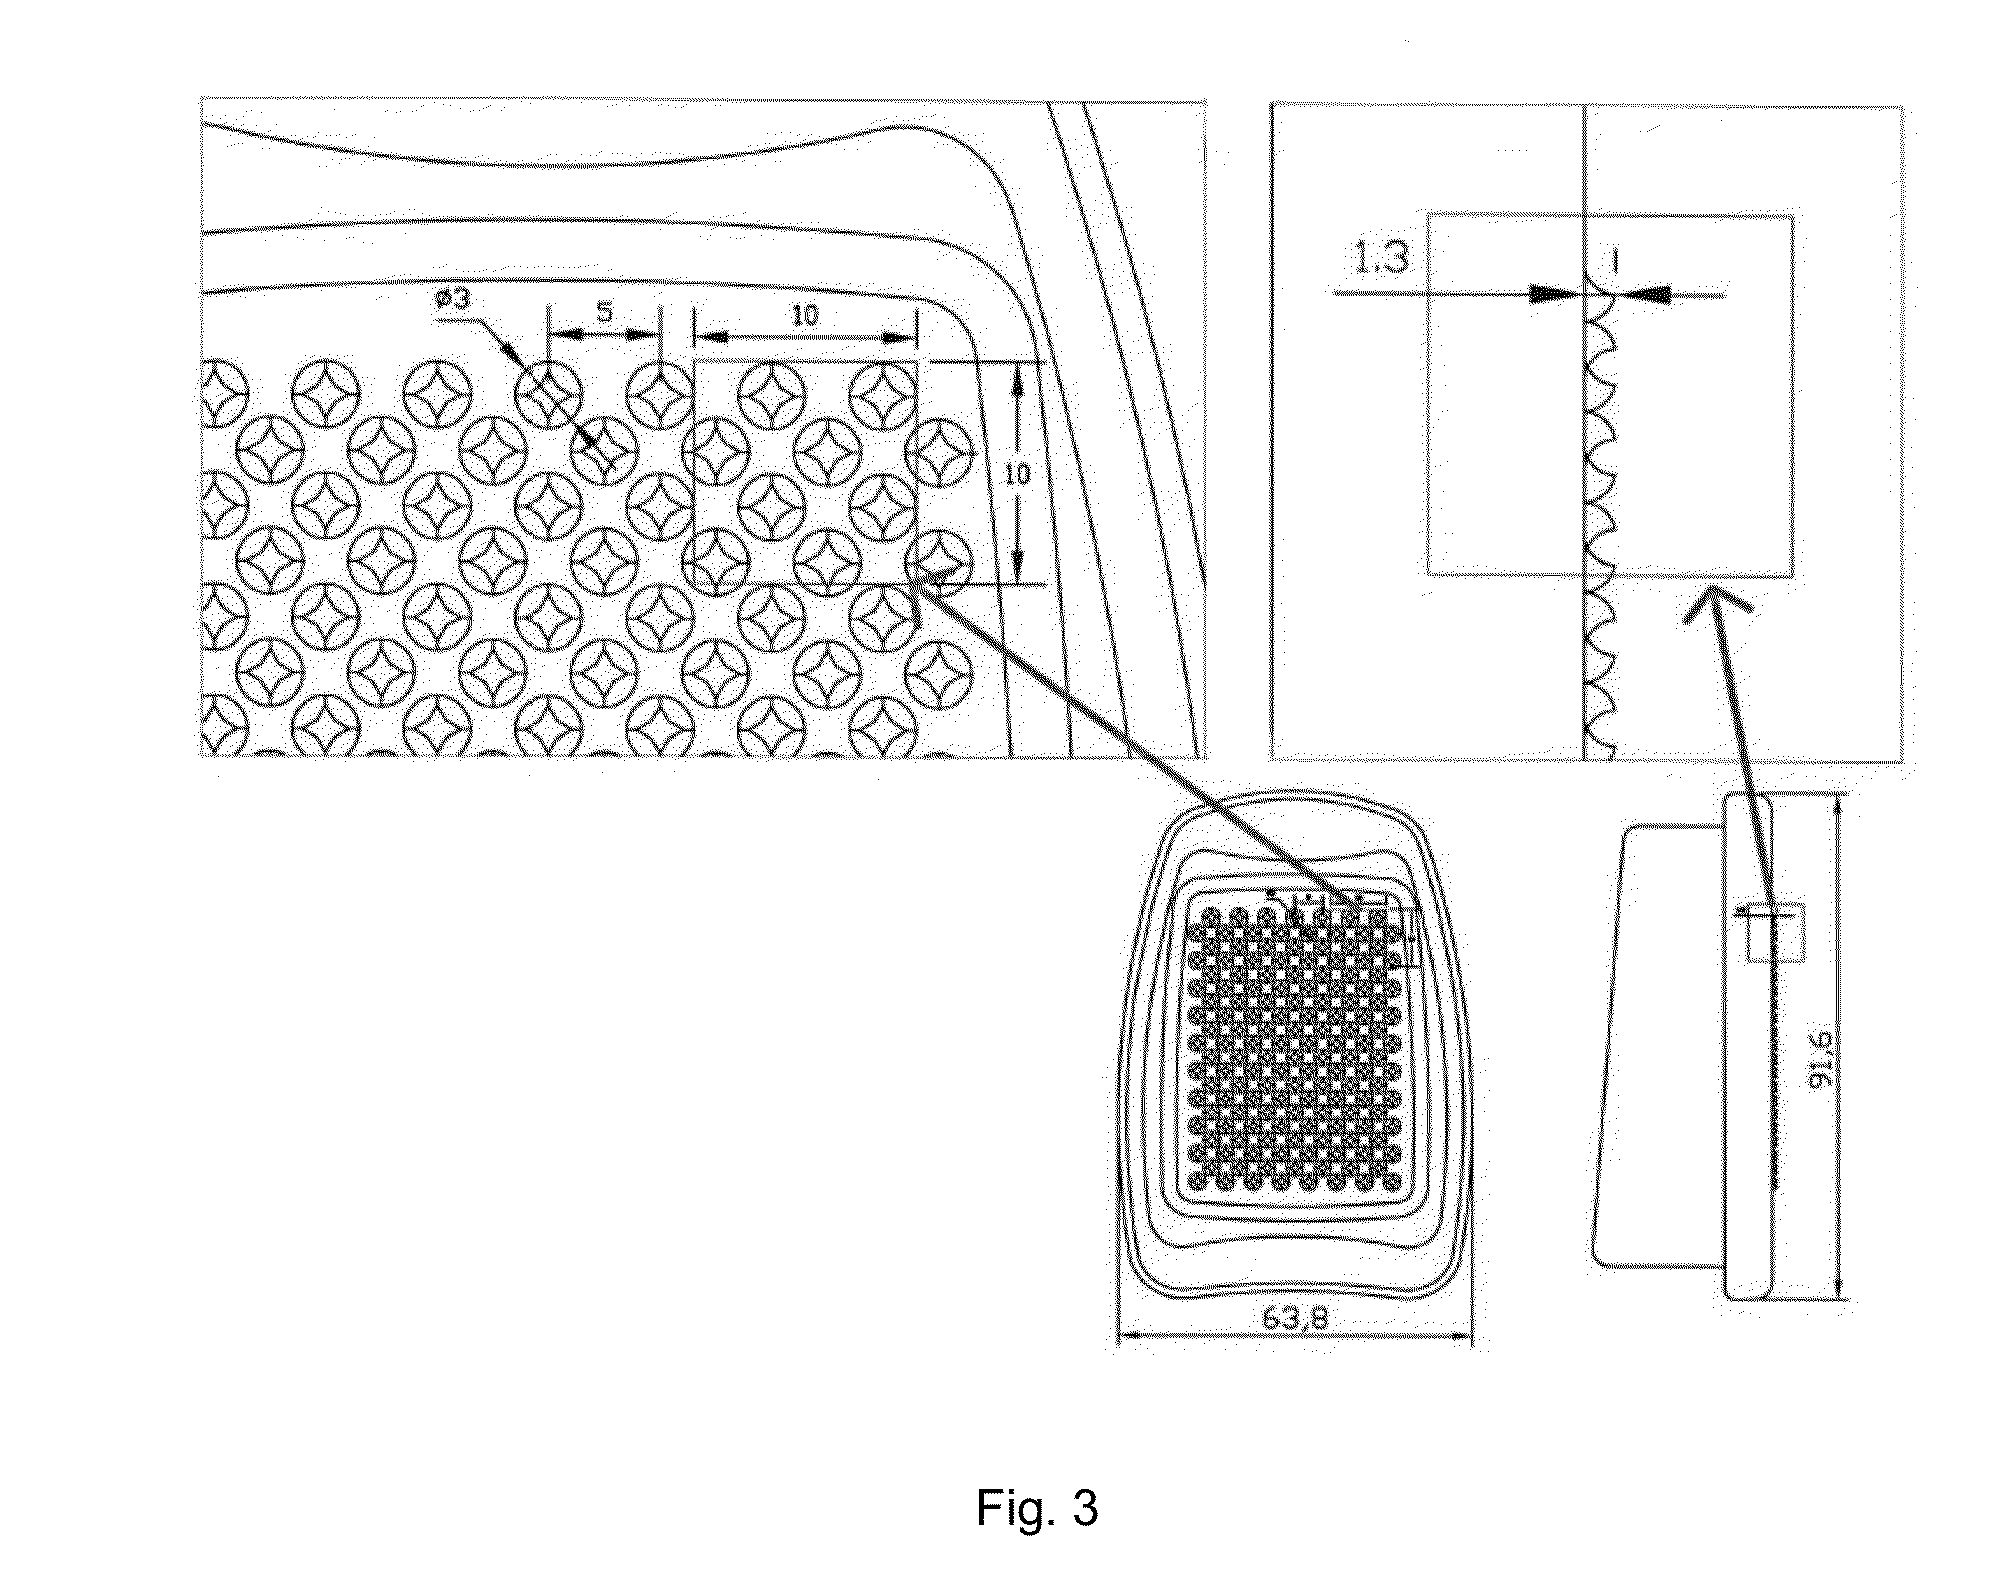 Abuse deterrent pharmaceutical compositions for controlled release